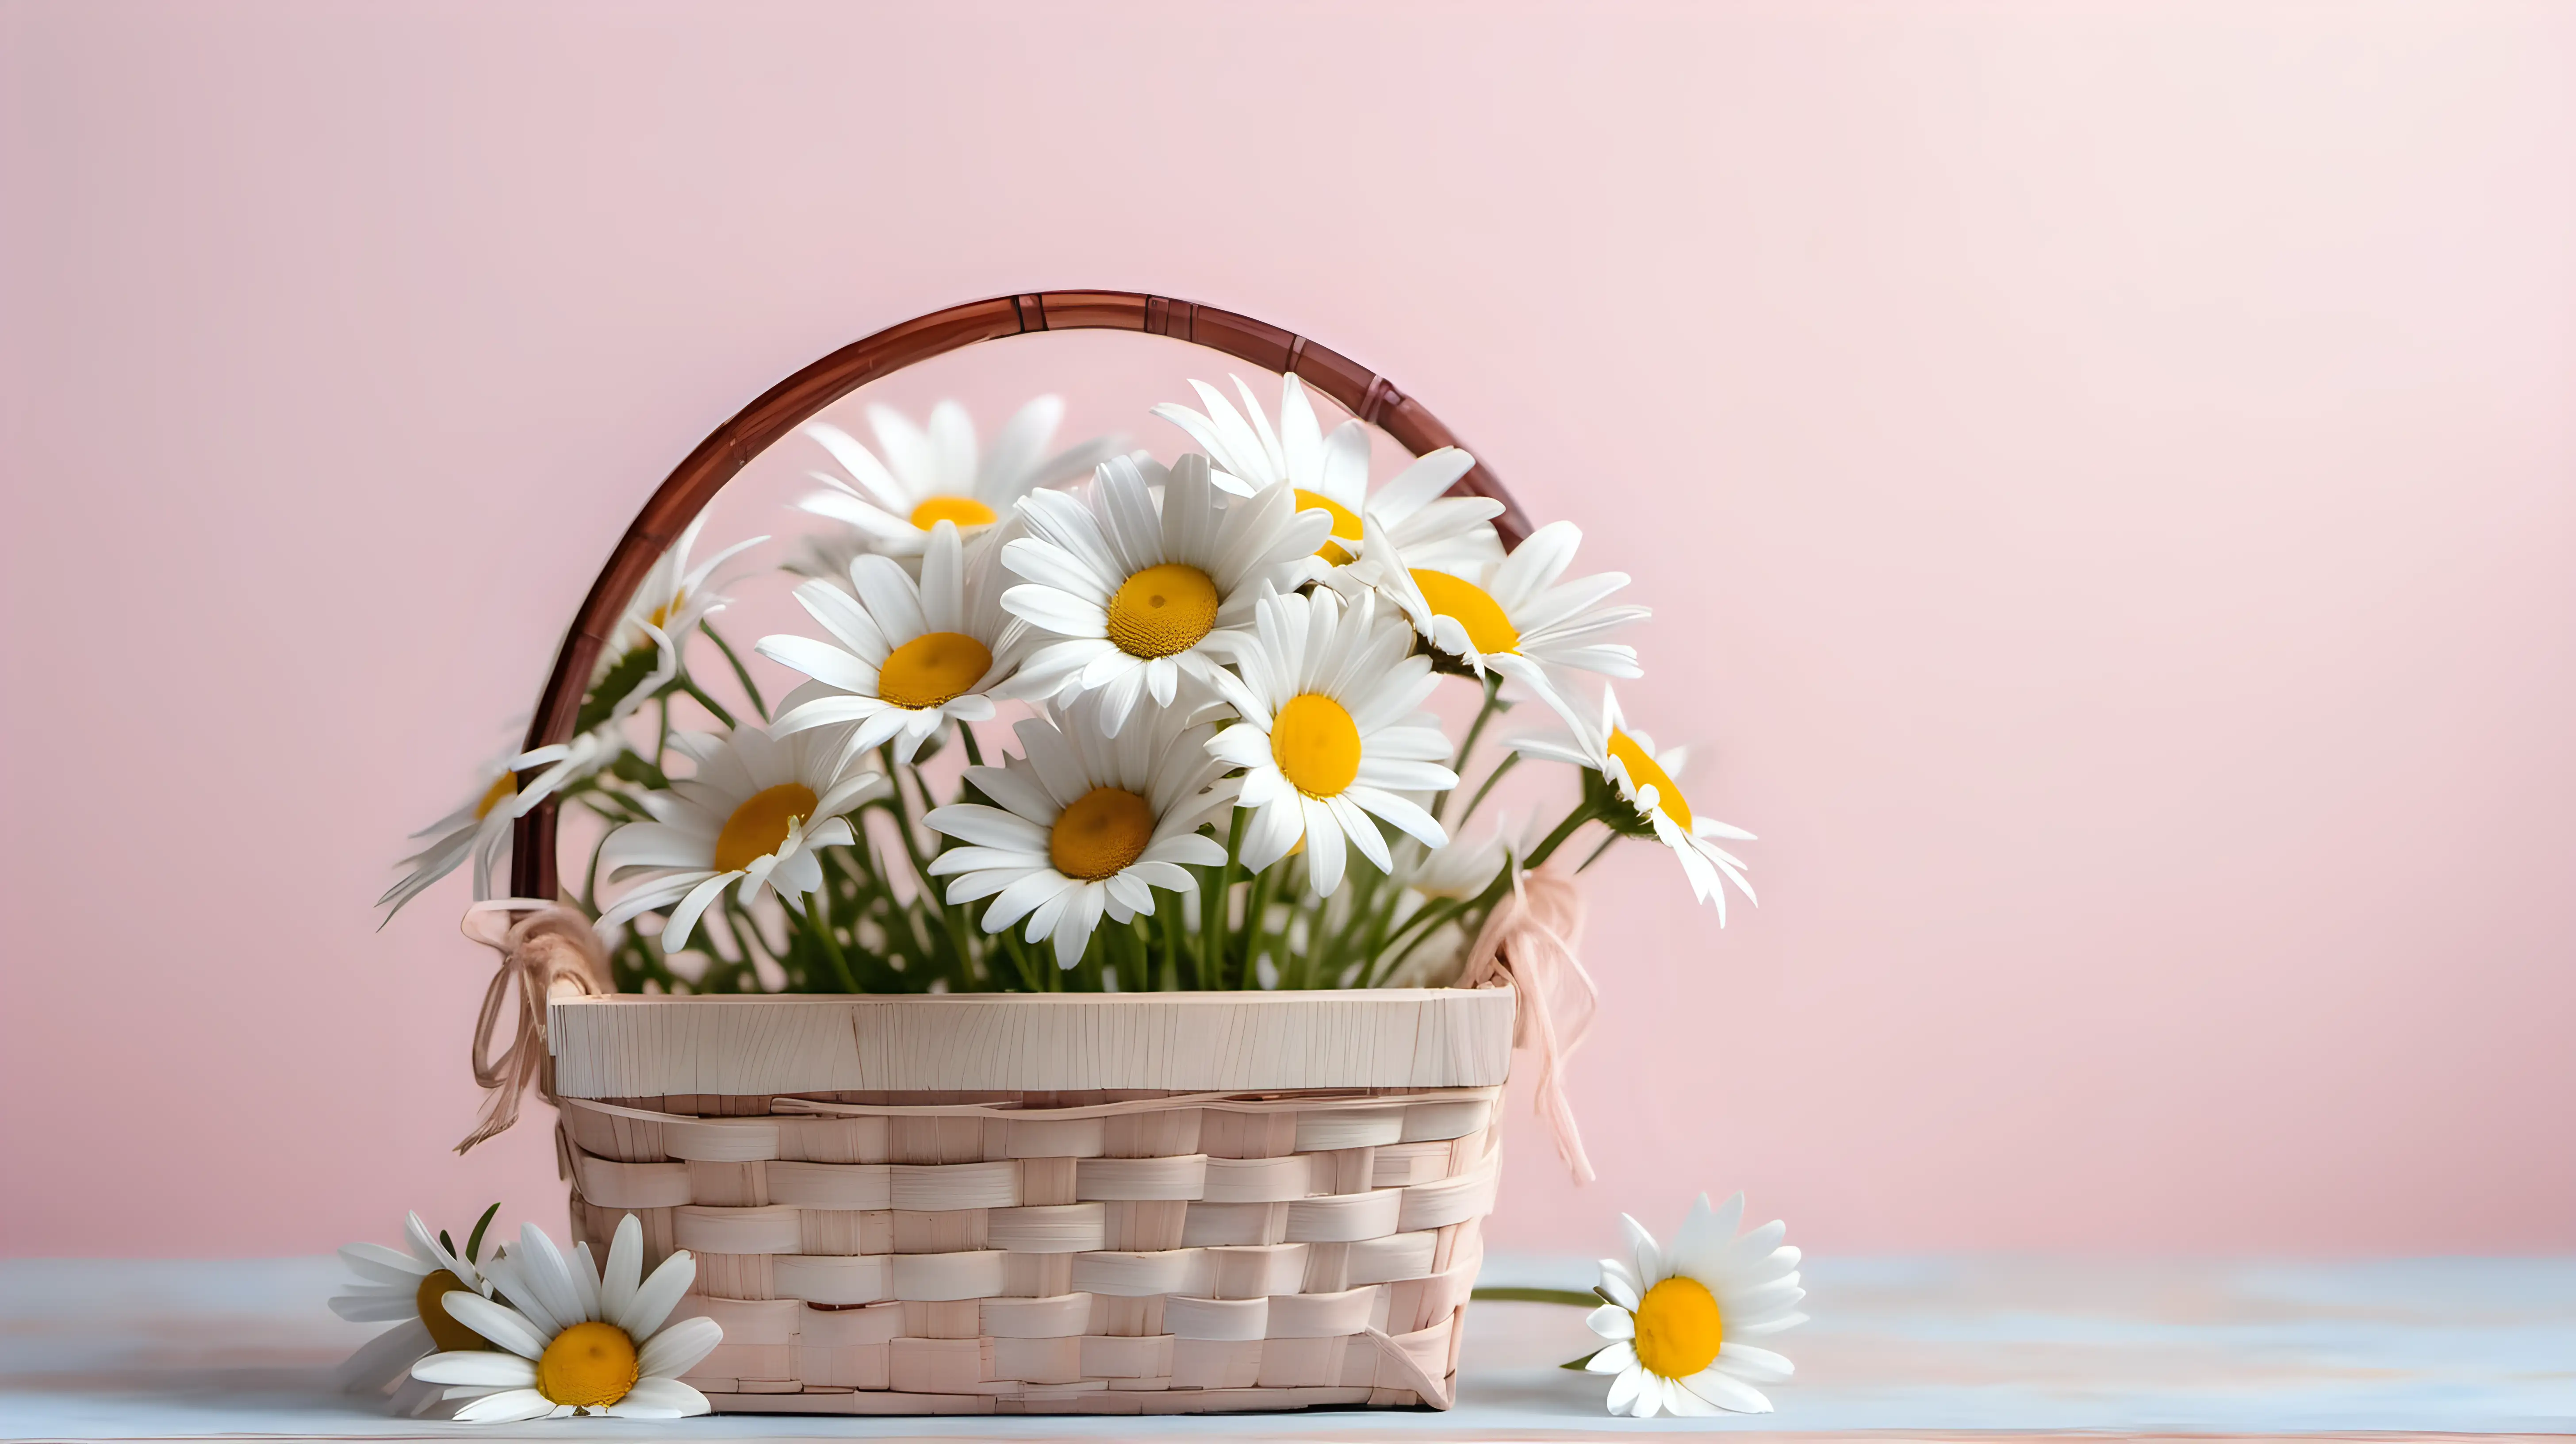 Coral Or Pink Daisy Chamomile Isolated On White Background Stock Photo -  Download Image Now - iStock